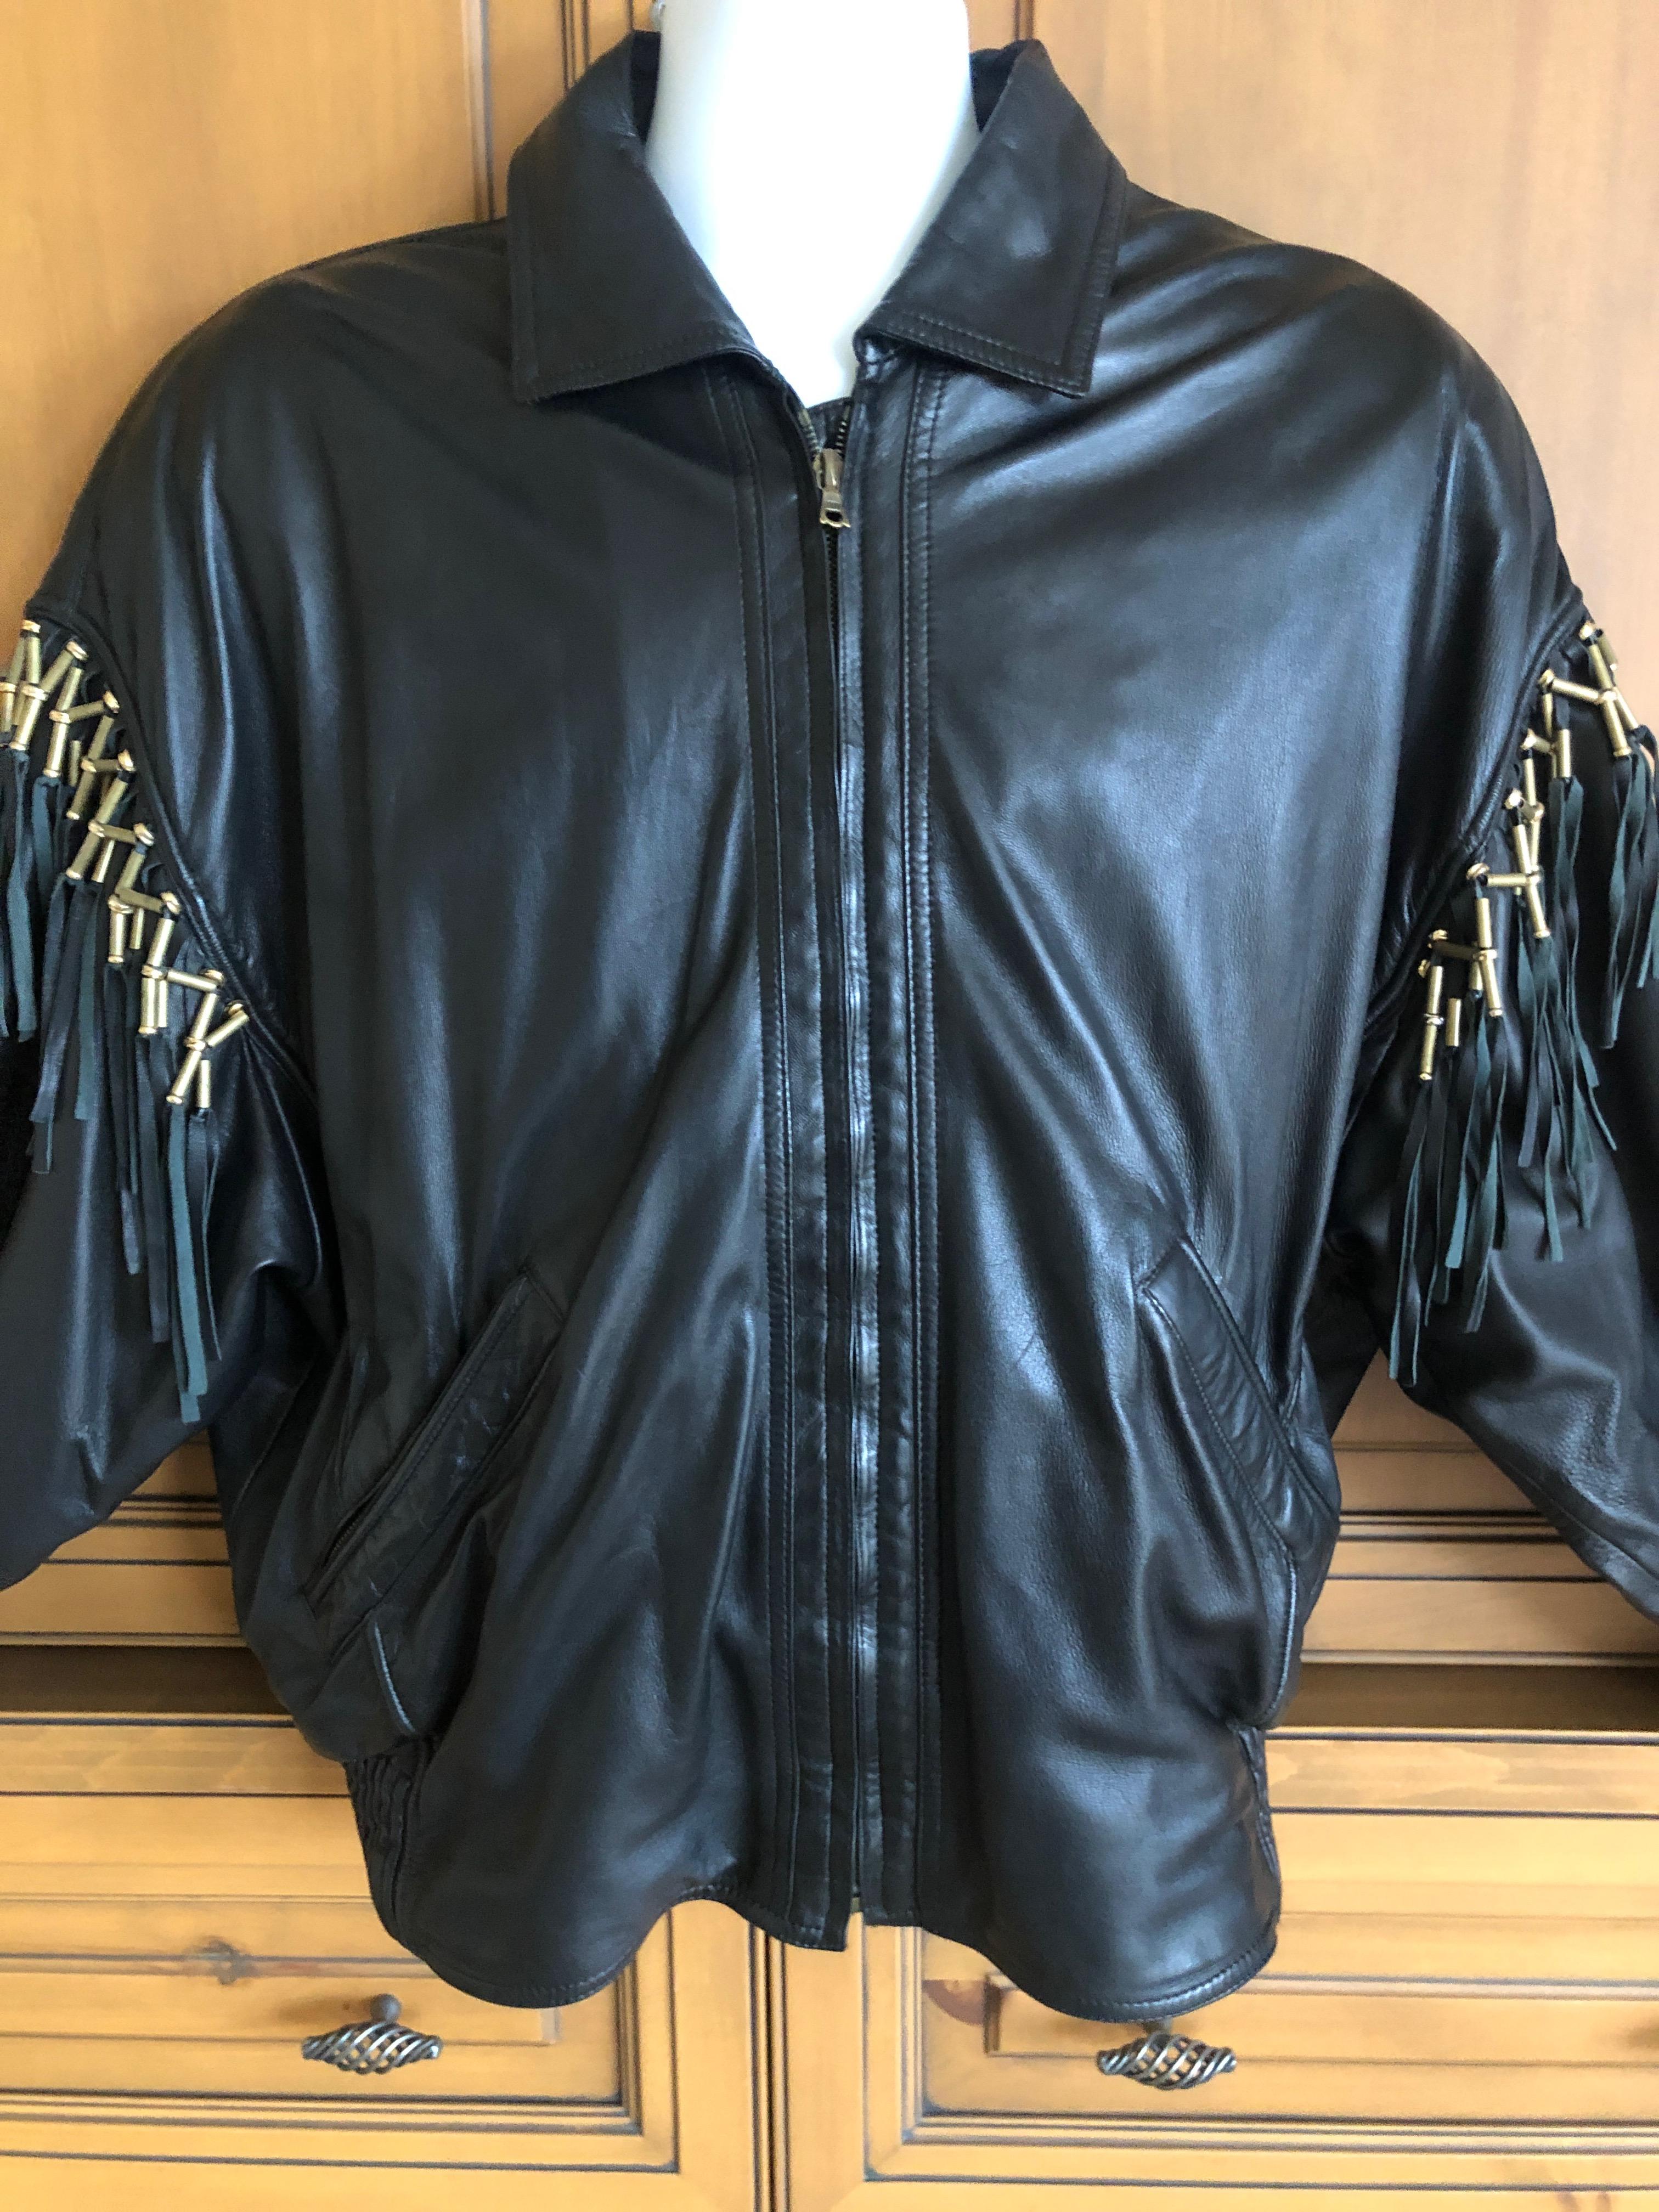 Gianni Versace 1984 Lambskin Leather Men's Jacket with Beaded Fringe For Sale 1